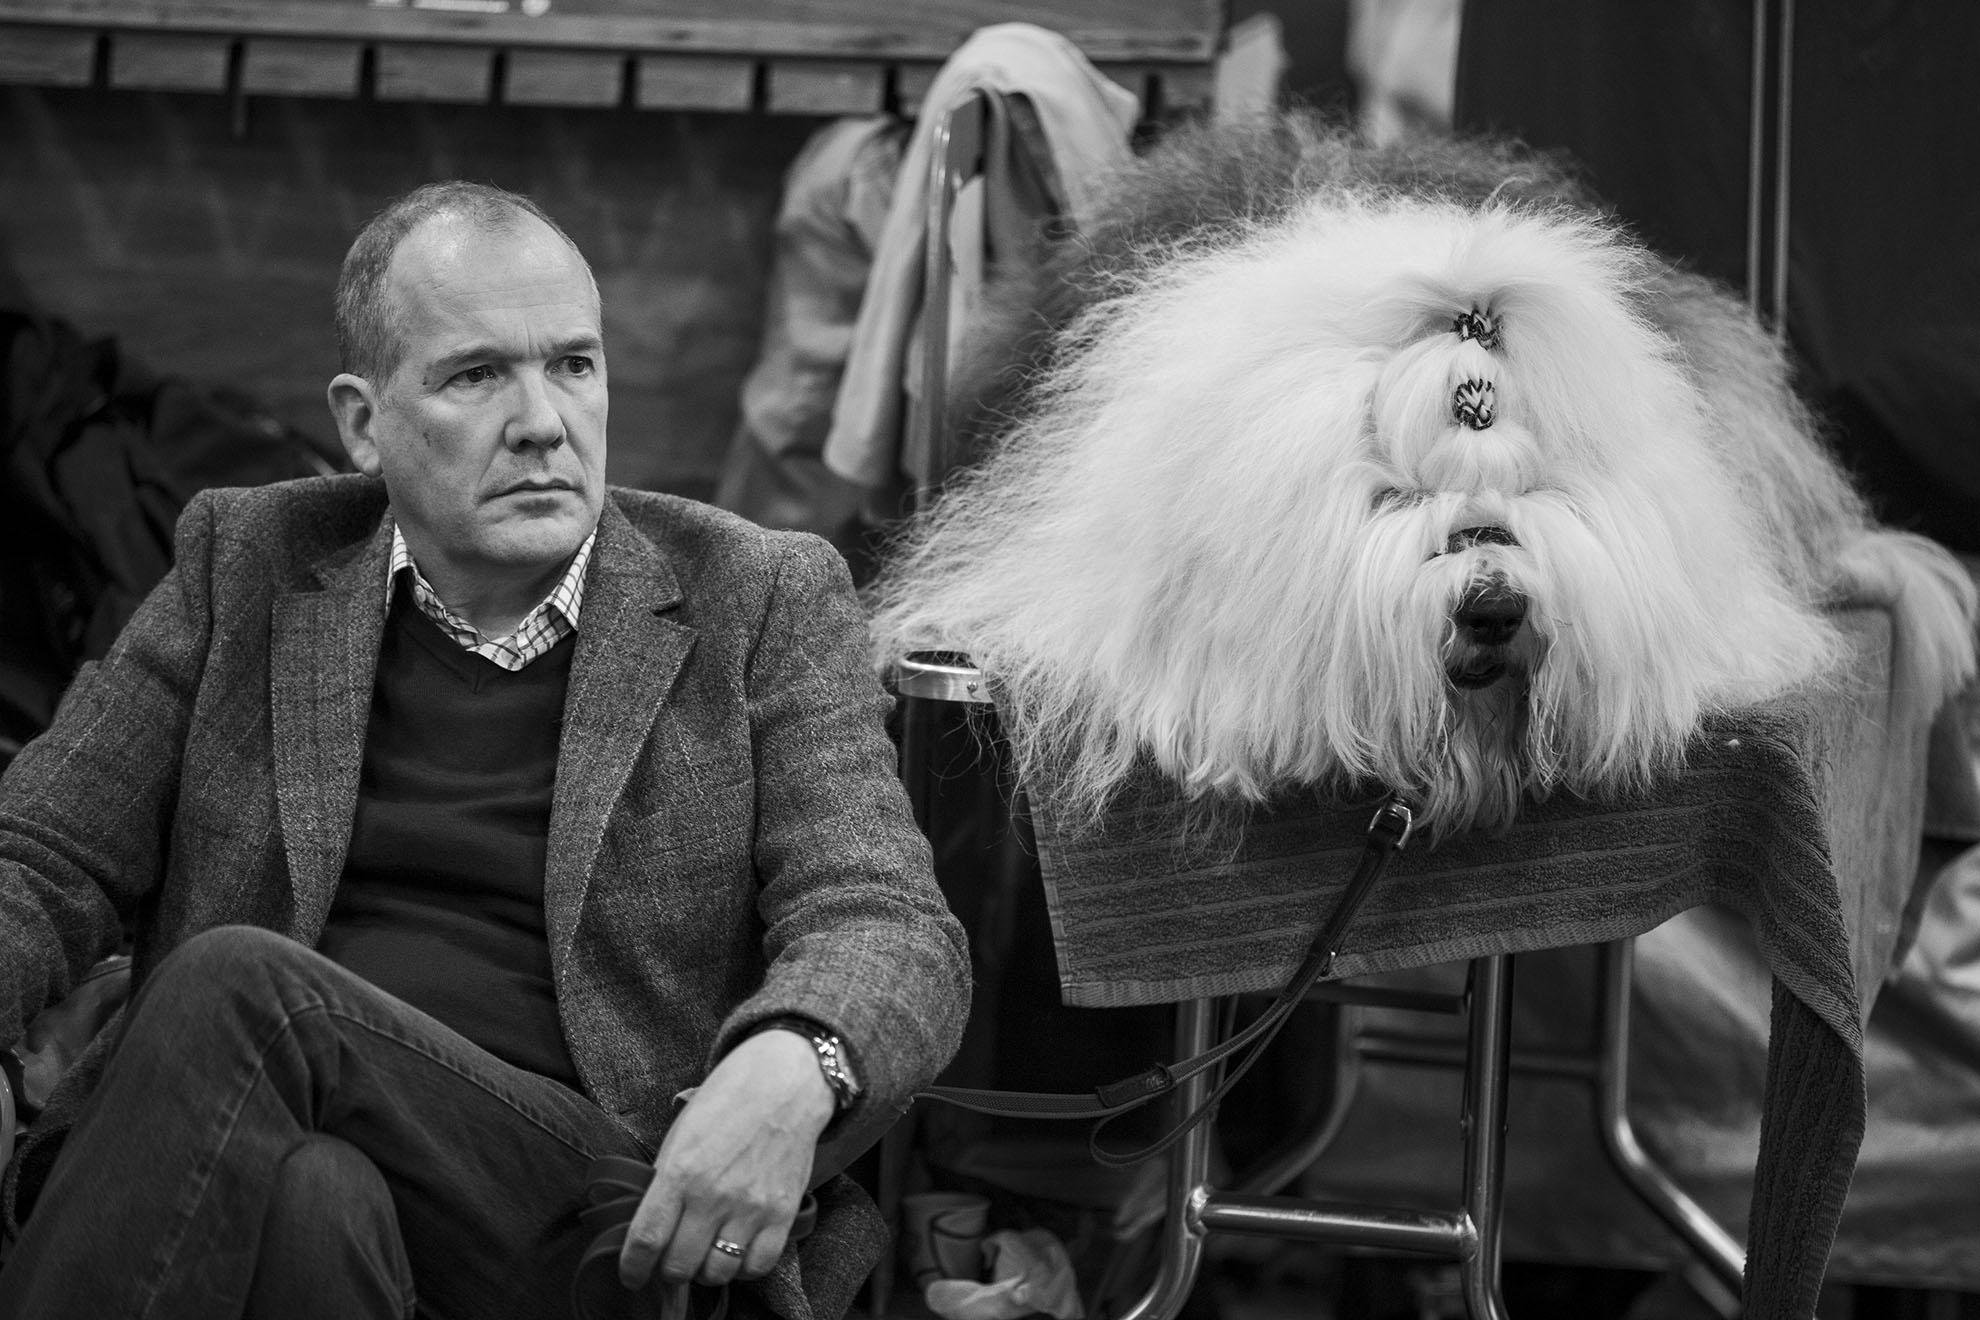  Crufts, the largest dog show in the world, takes place every March in Birmingham, UK. 